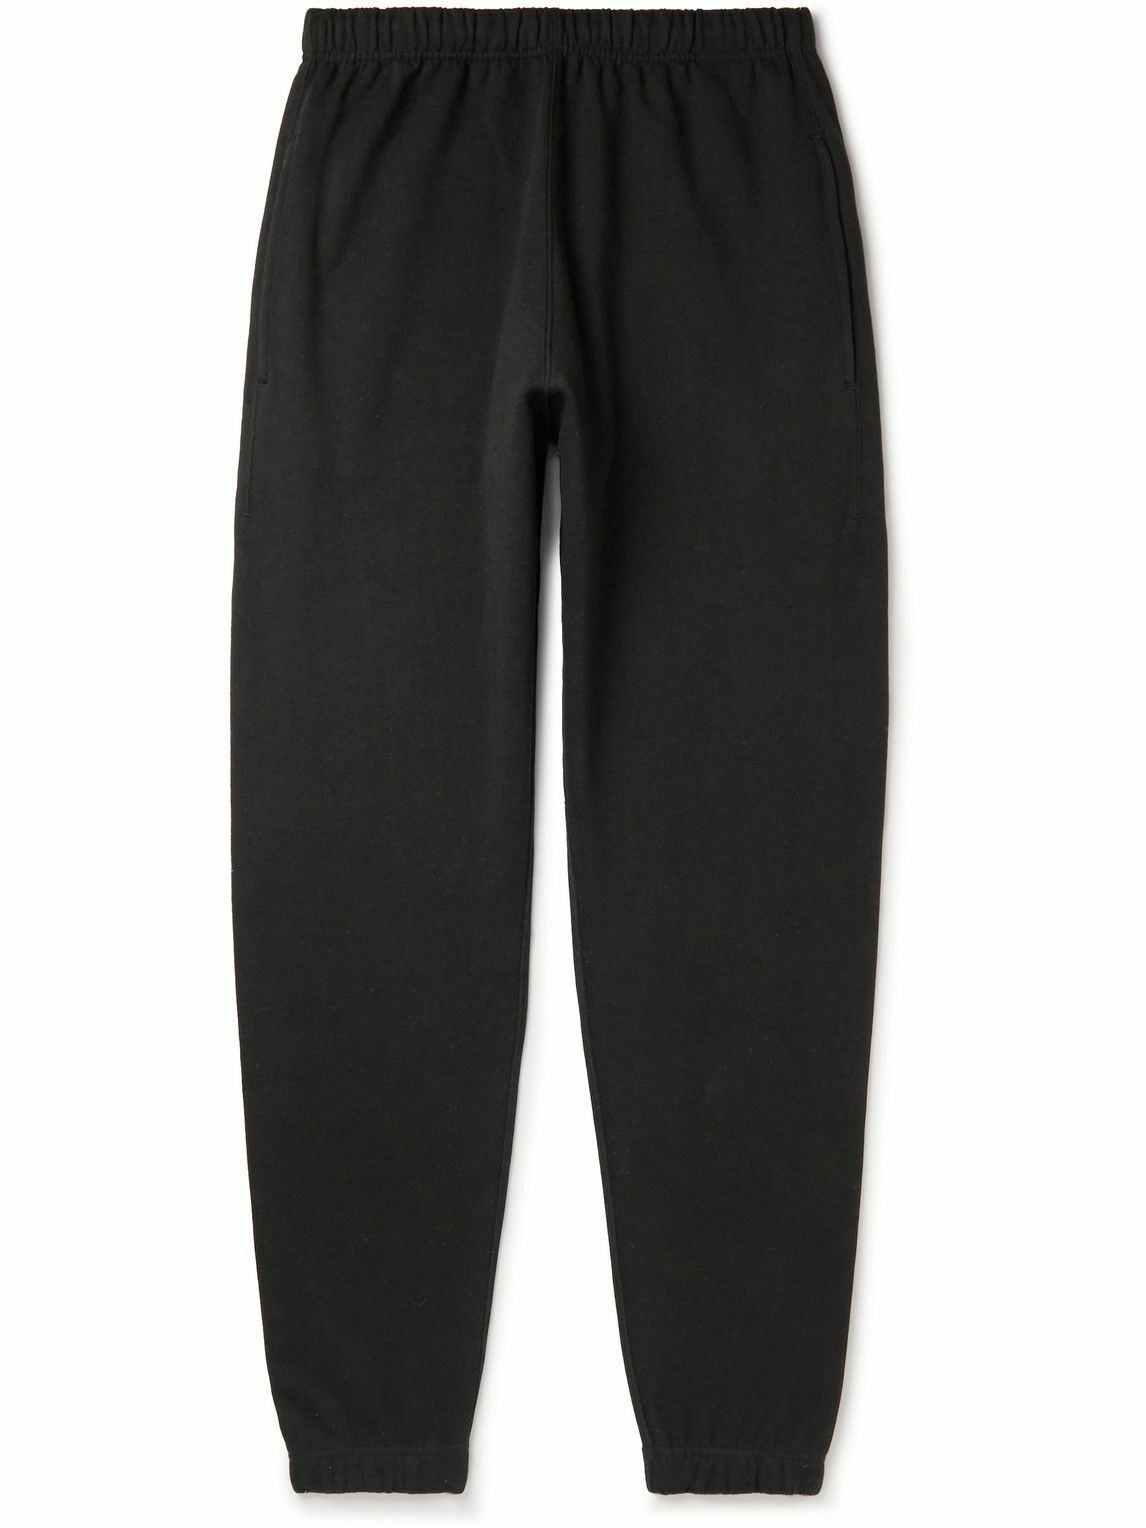 KENZO - Tapered Logo-Embroidered Cotton-Jersey Sweatpants - Black Kenzo